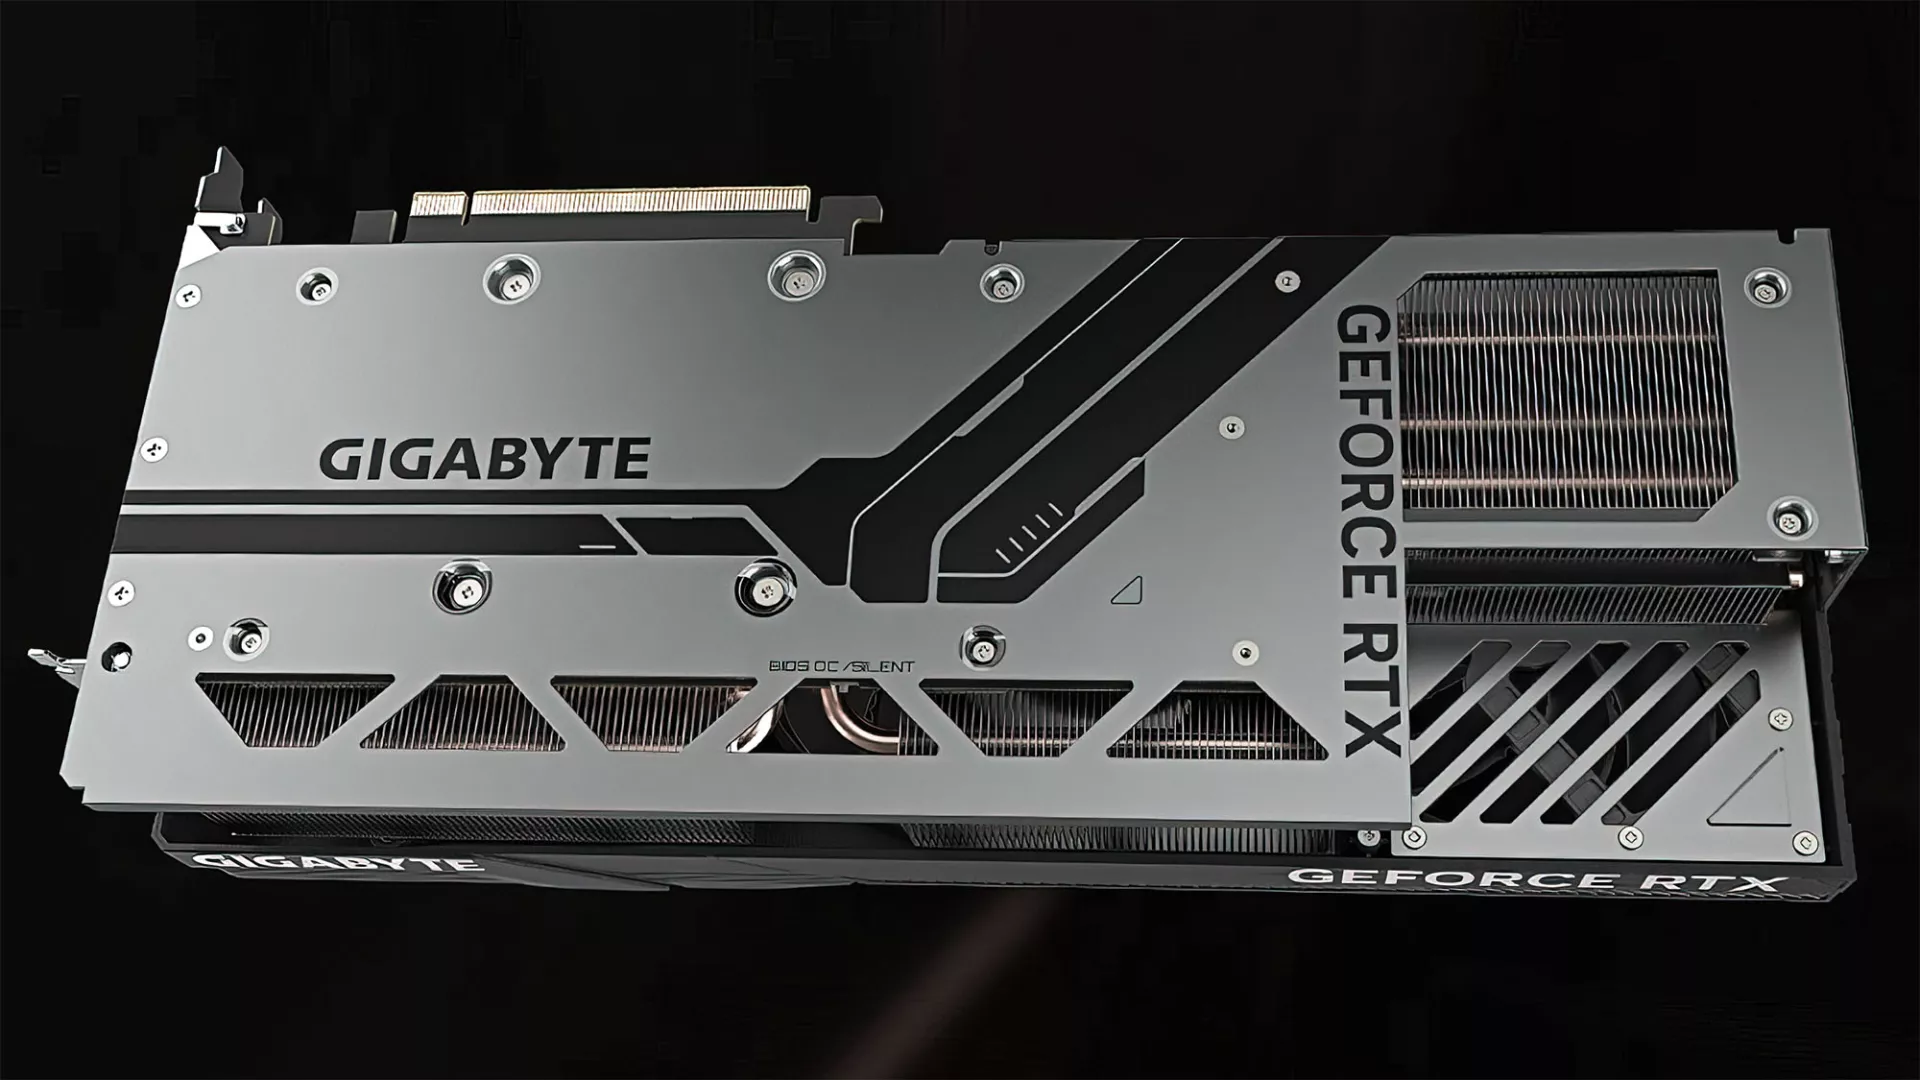 Gigabyte Rtx 4090 Graphics Card With Advanced Cooling System And Enhanced Power Delivery.